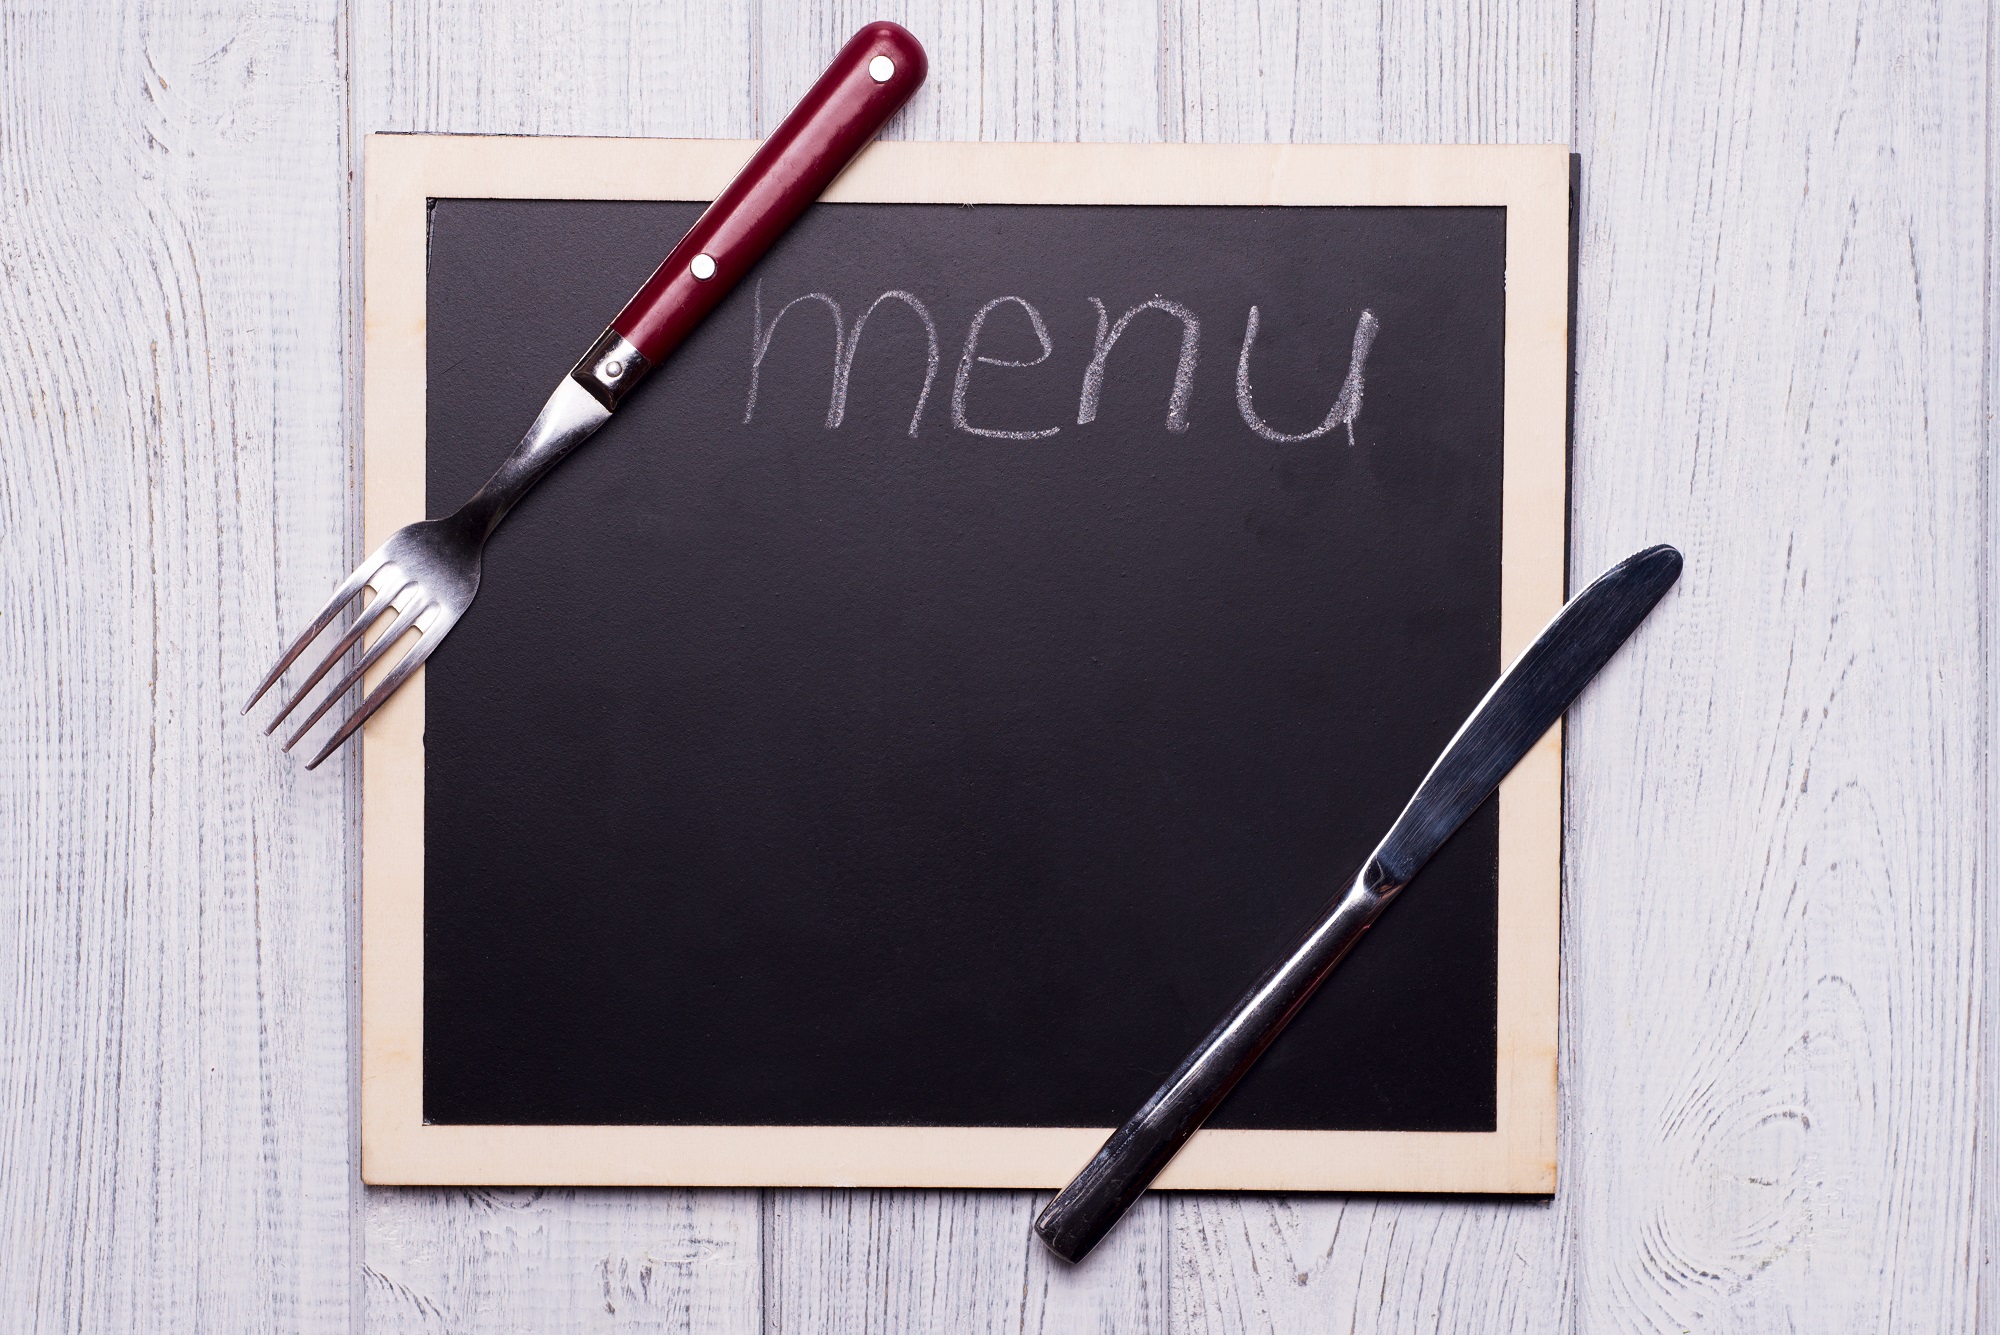 restaurant menu is another very powerful restaurant industry trend